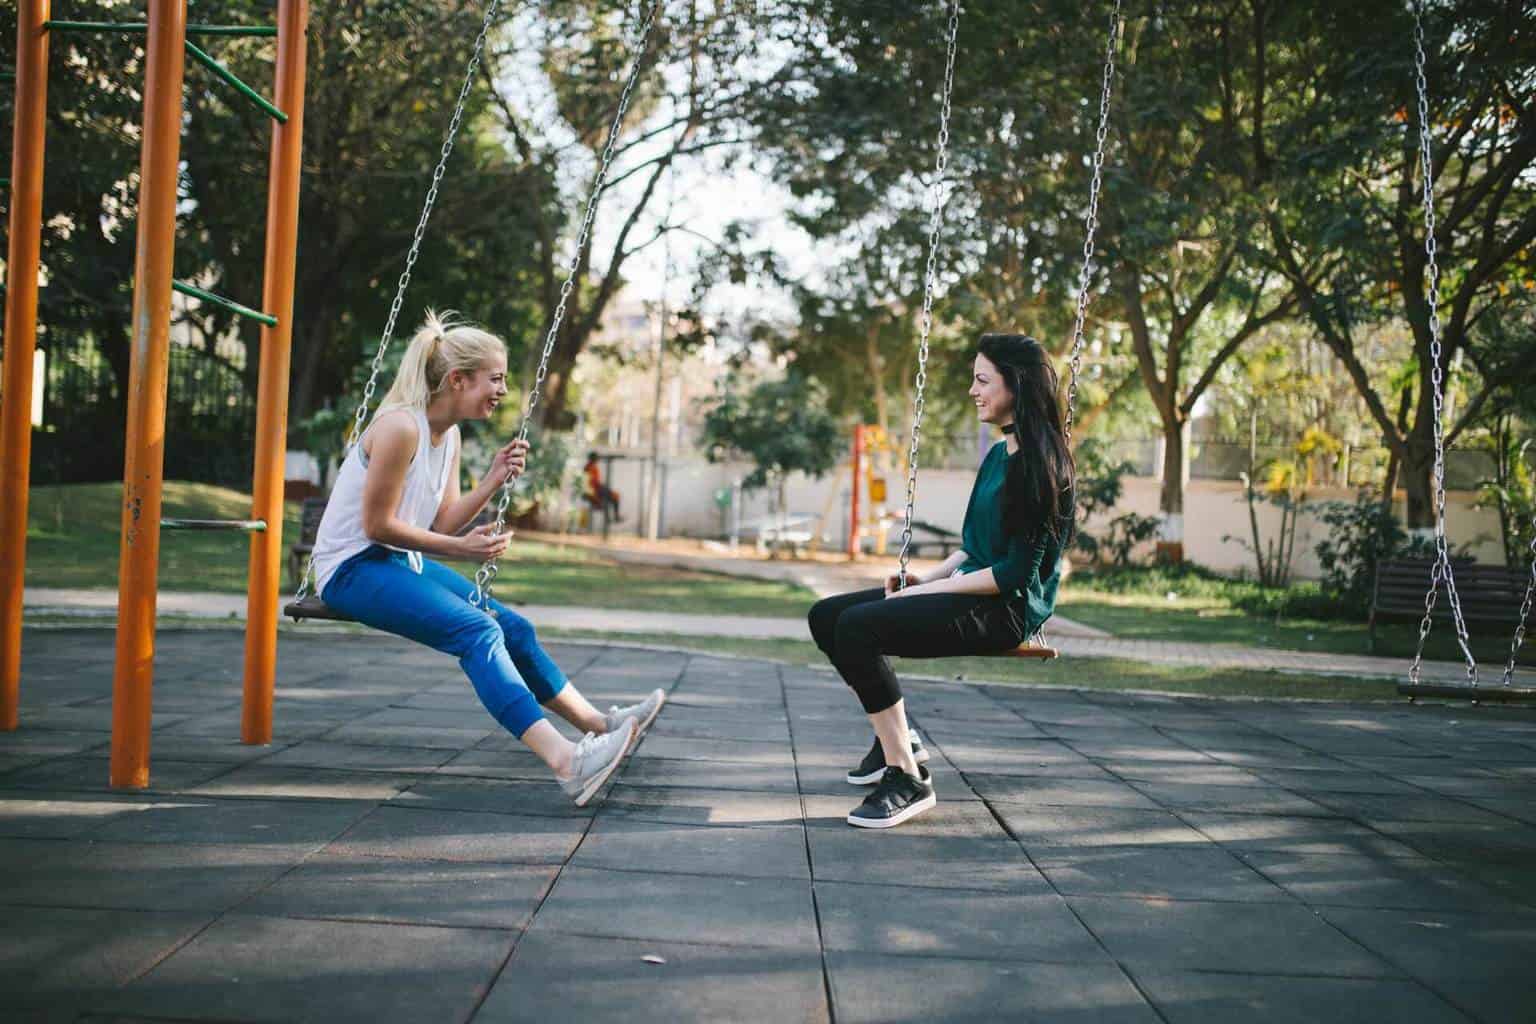 Two people sitting on swings facing each other.